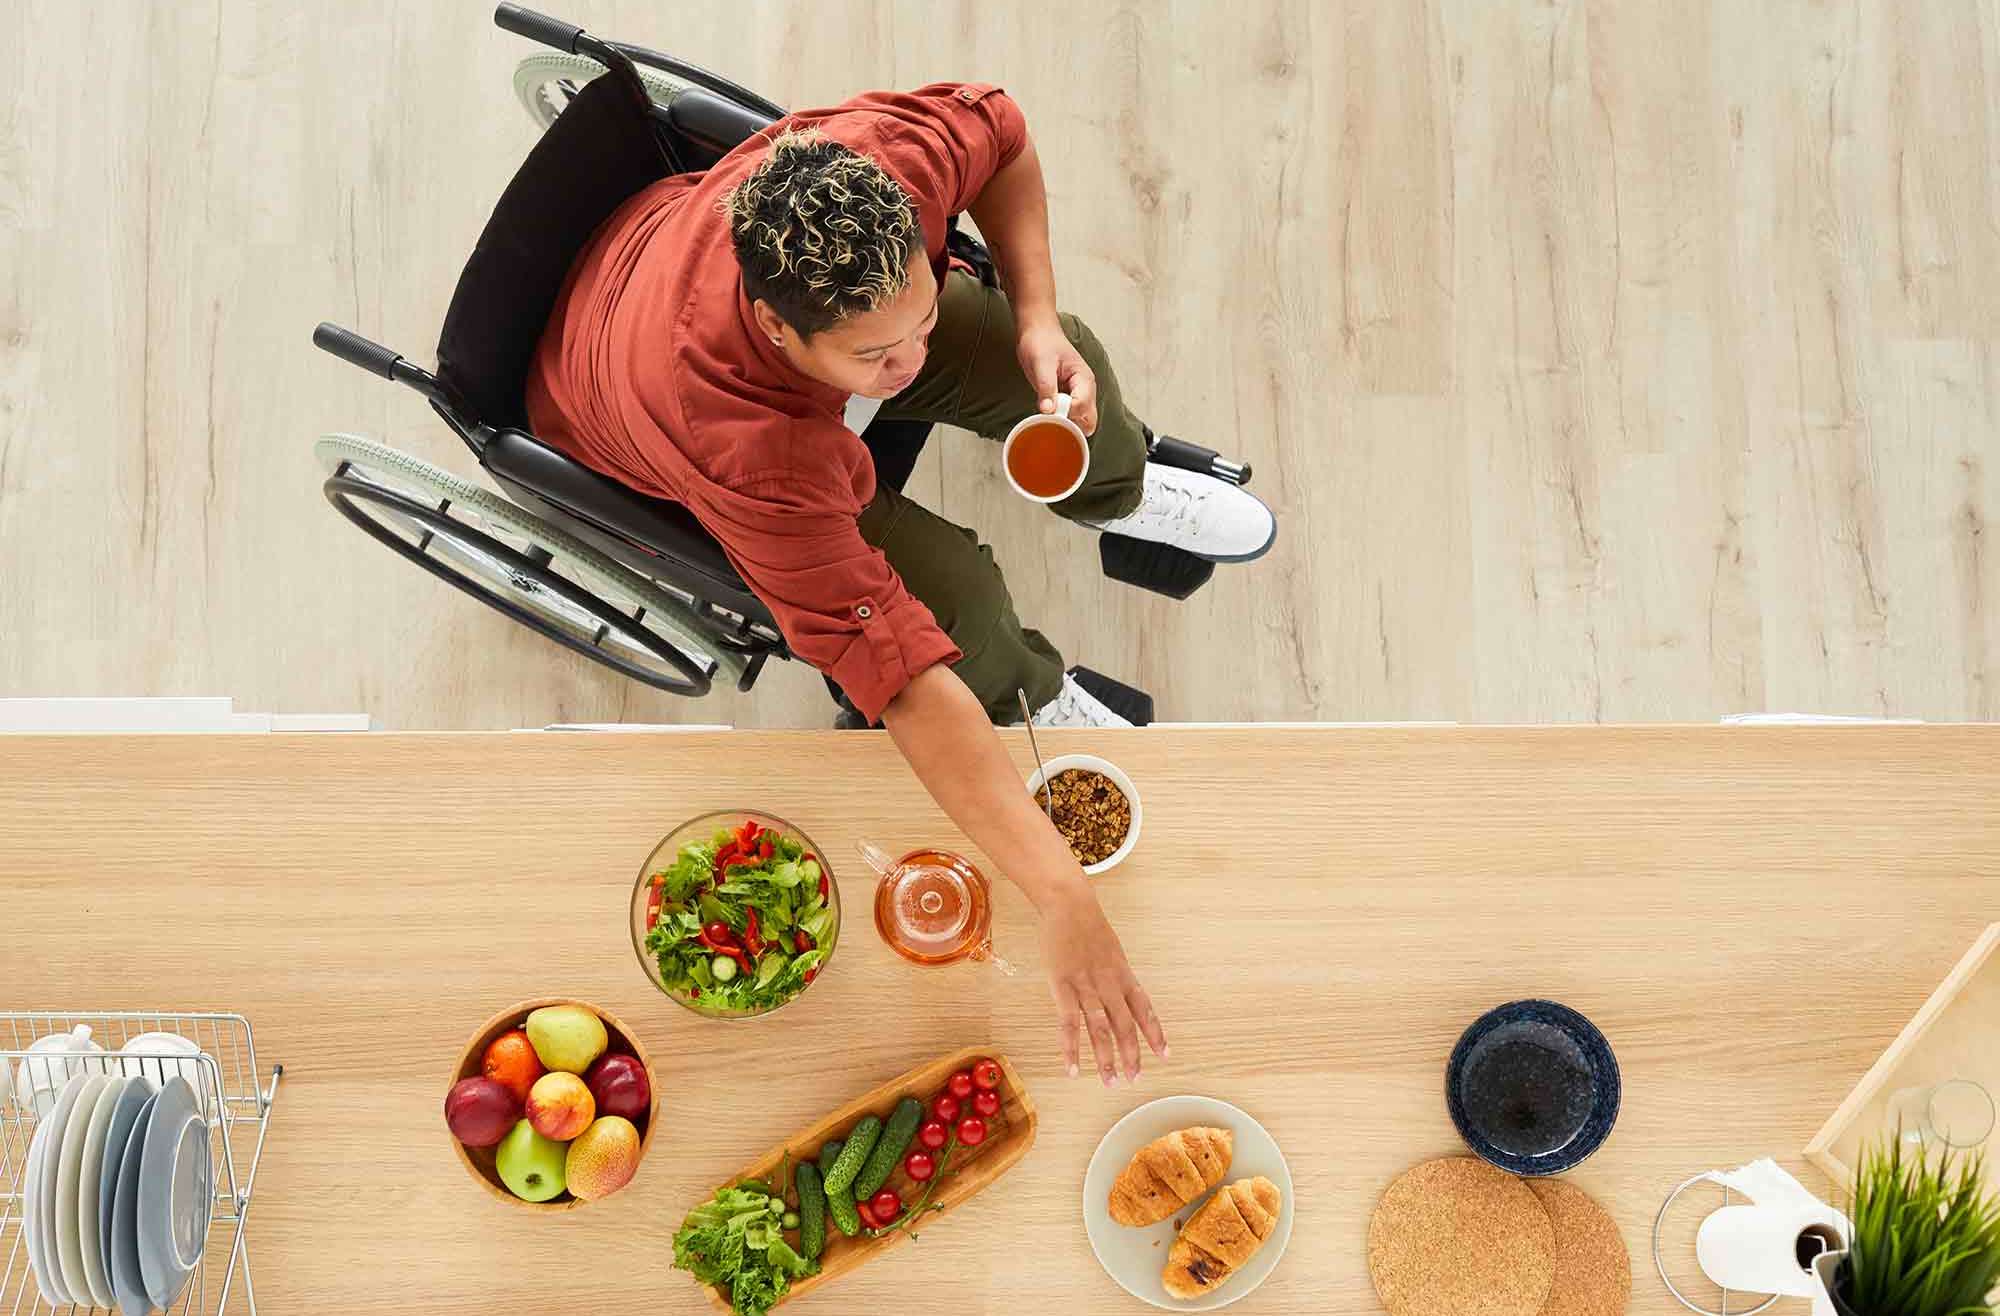 A woman in a wheelchair reaching across a buffet to get food. Demonstrating how there is a need to create food inclusion for individuals with disabilities